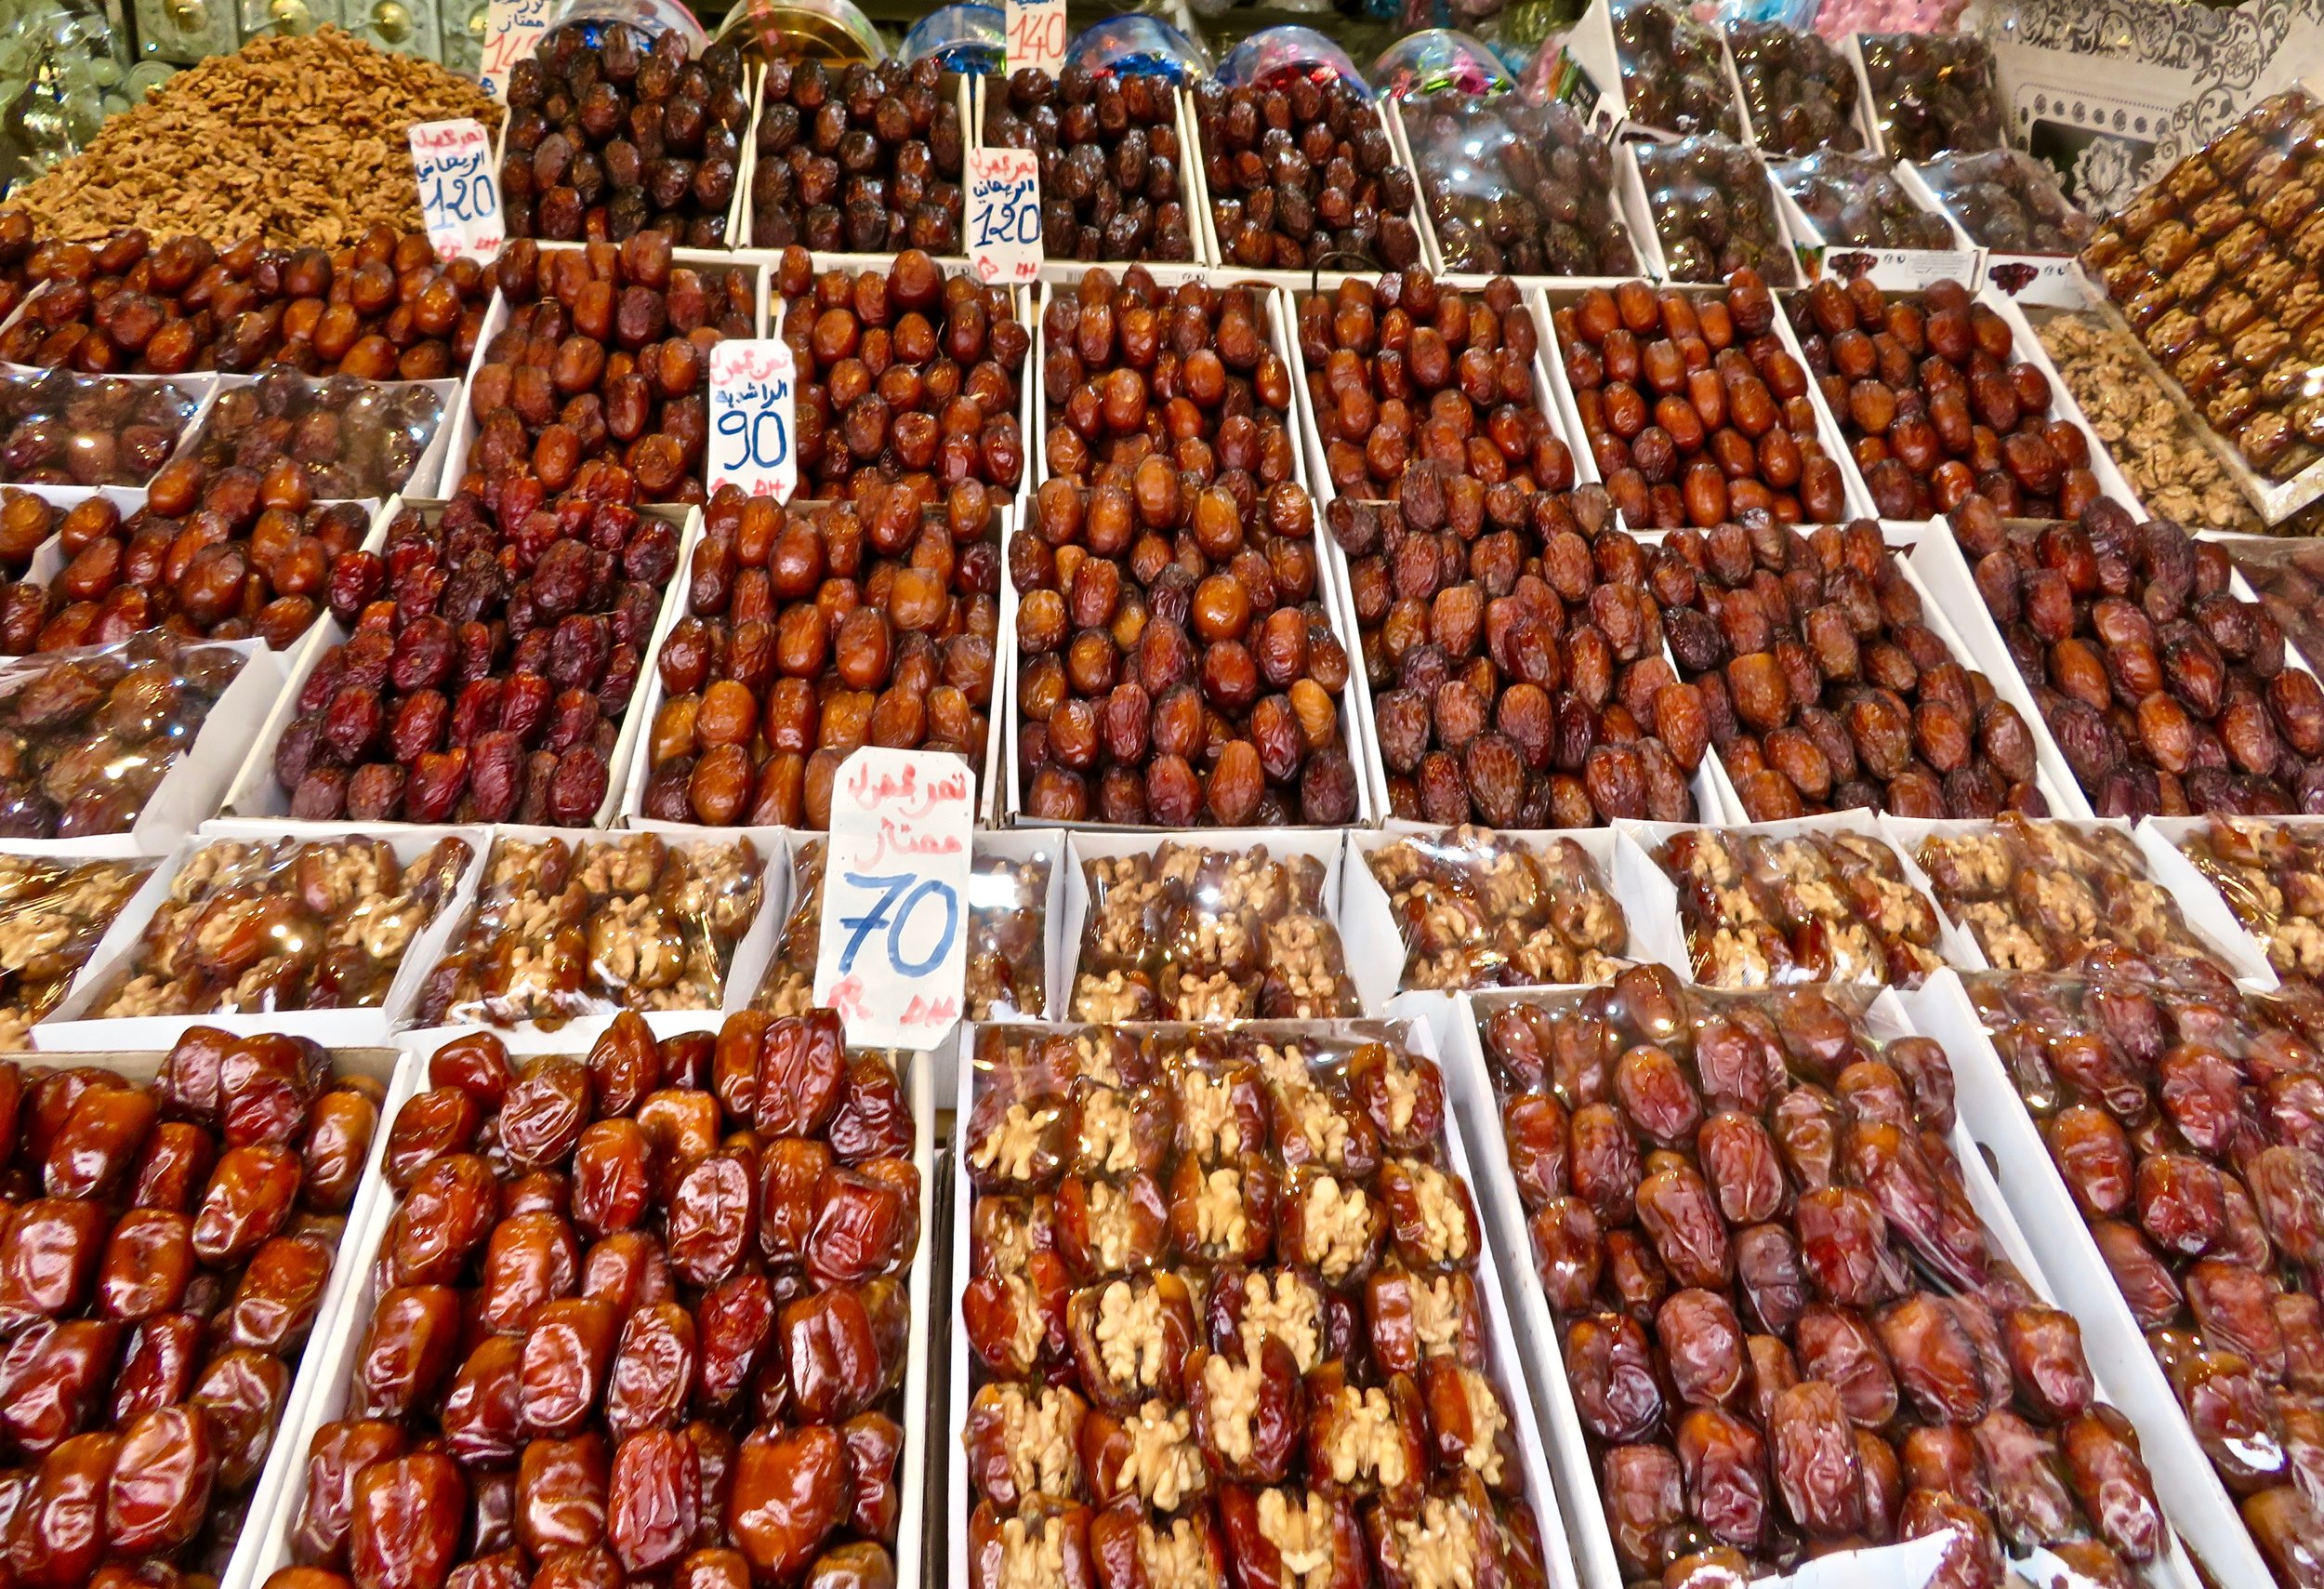 Dates! Fat, juicy dates! Row-upon-row of them!